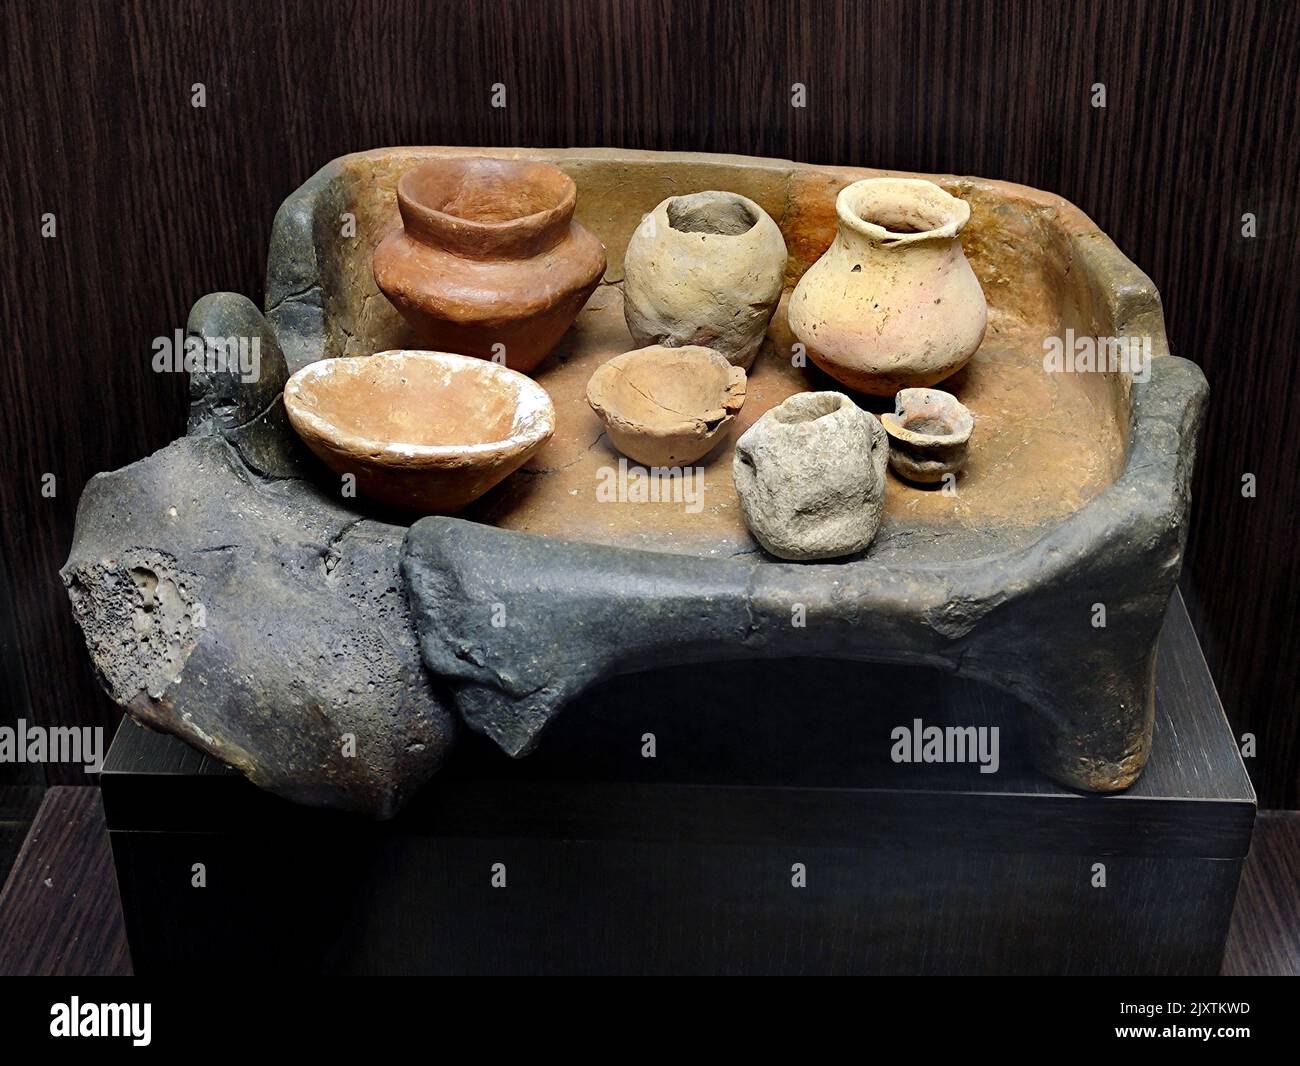 KYIV, UKRAINE - SEPTEMBER 7, 2022 - Artifacts of the Cucuteni–Trypillia culture are on display at the Trypillia Culture: The Roots of the Unconquered Stock Photo